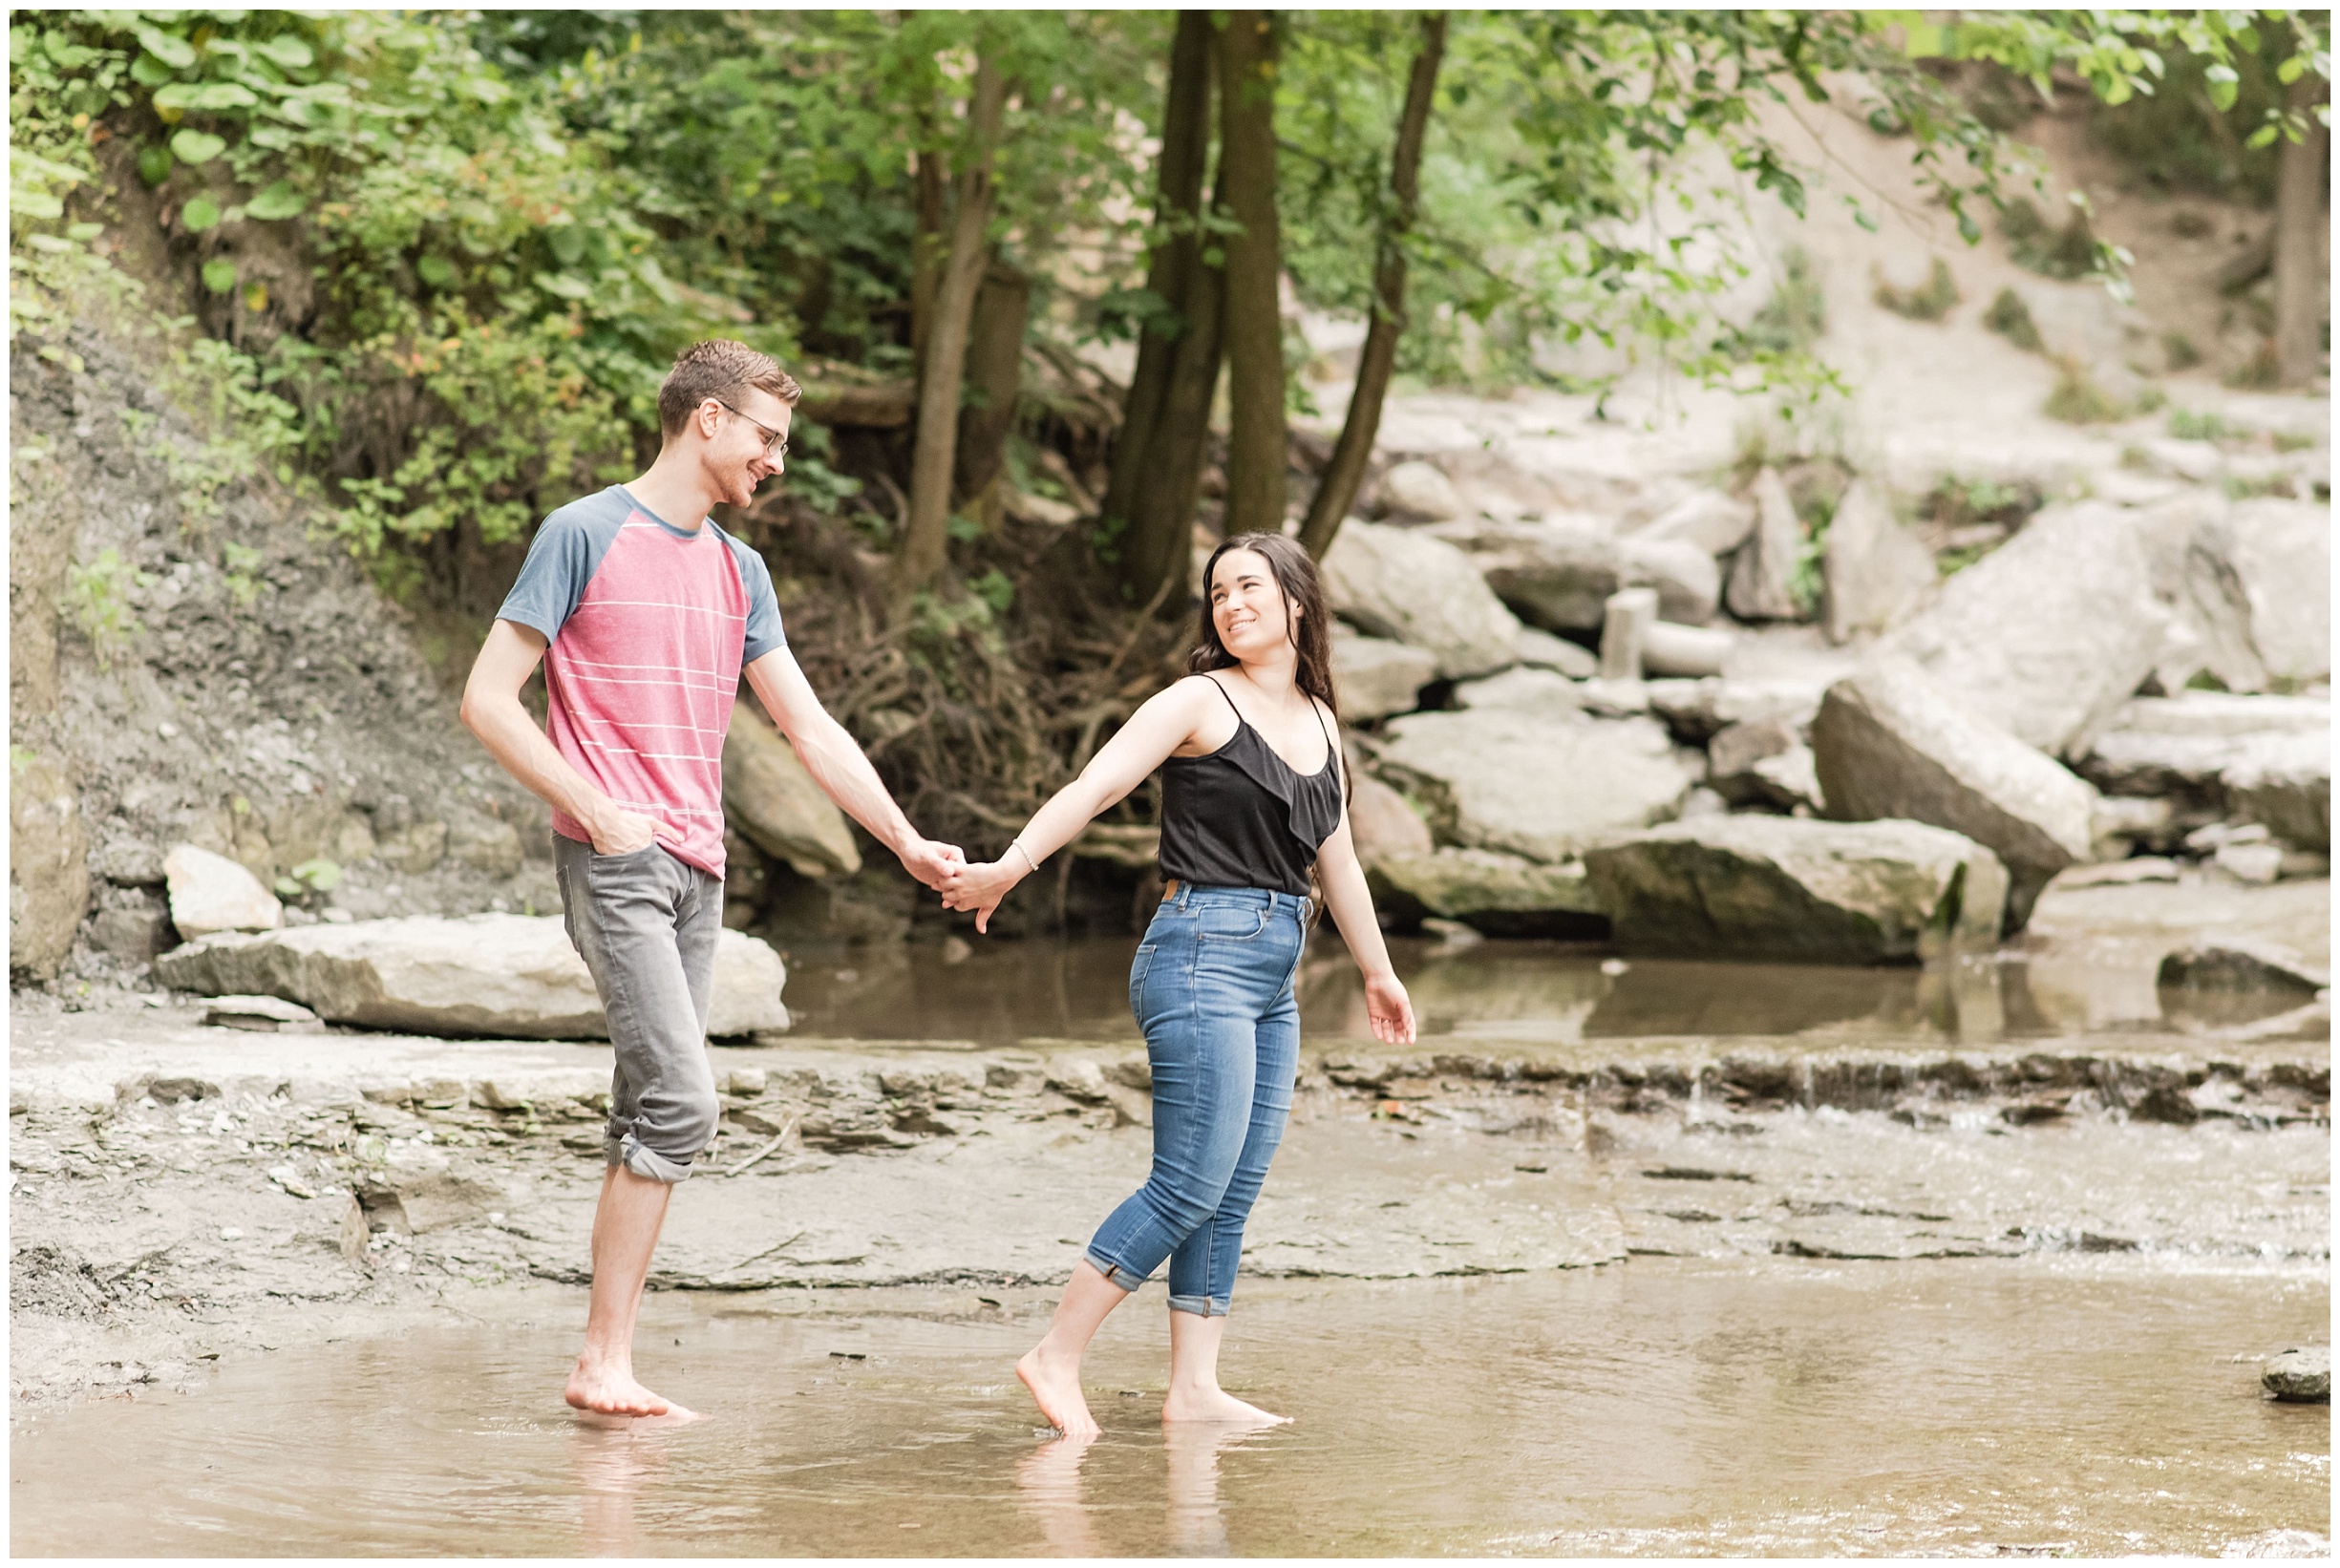 a woman wearing a black tank top and blue jeans leads a man in a pink shirt and grey shorts. they're walking through a shallow pond with trees and rocks in the background. photo is used in a blog post about social media for photographers